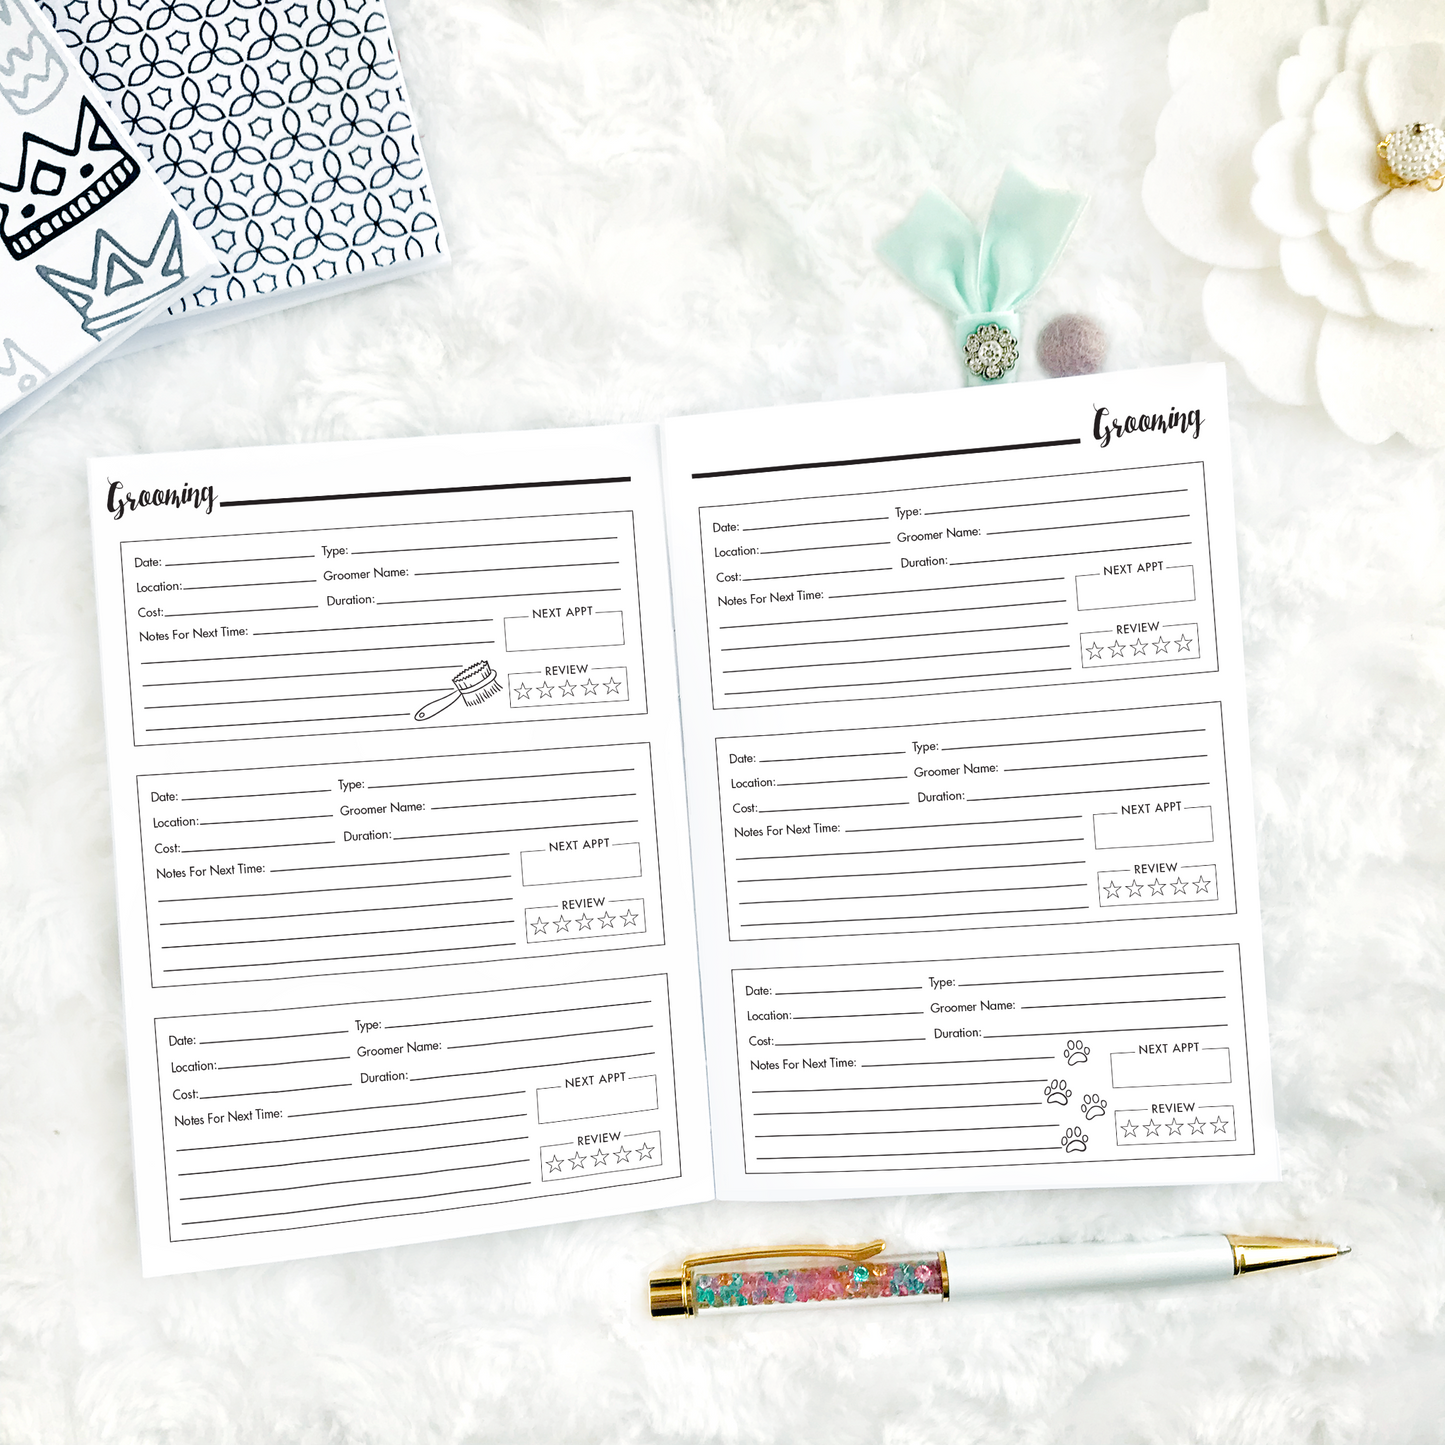 Pet Planner for Dogs | Printable